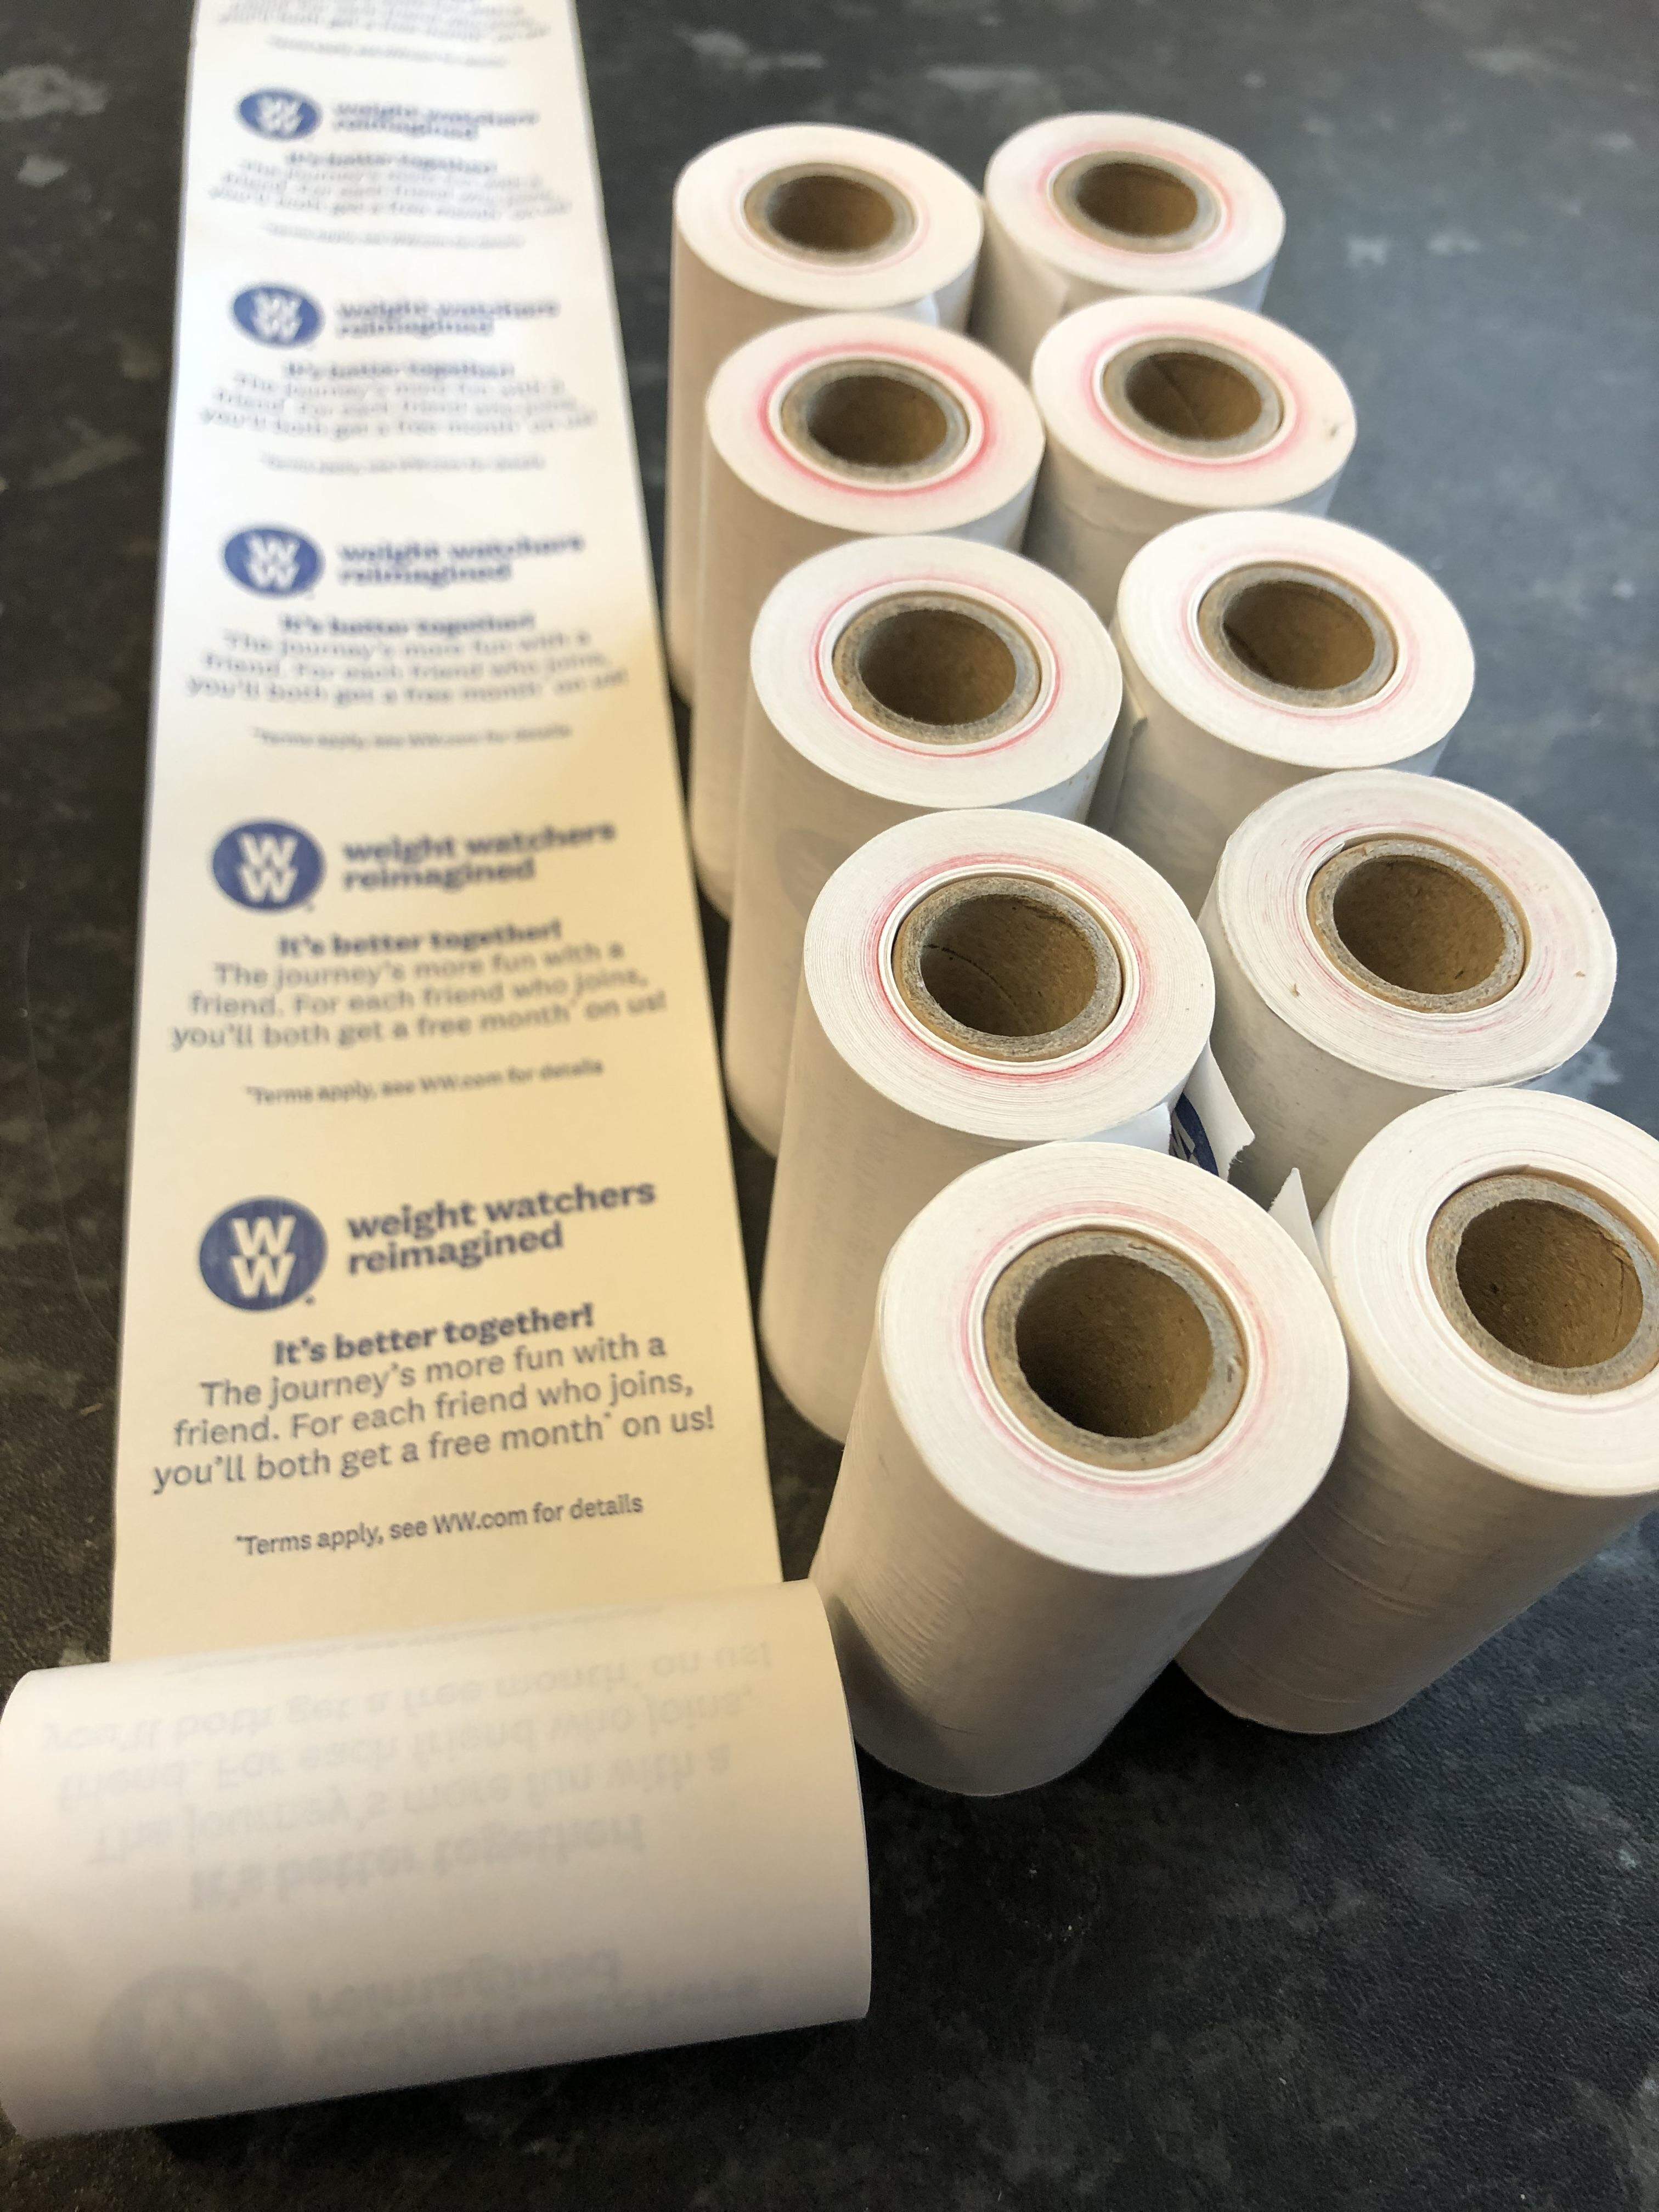 receipt rolls that have been printed on the reverse with a weigh watchers advert